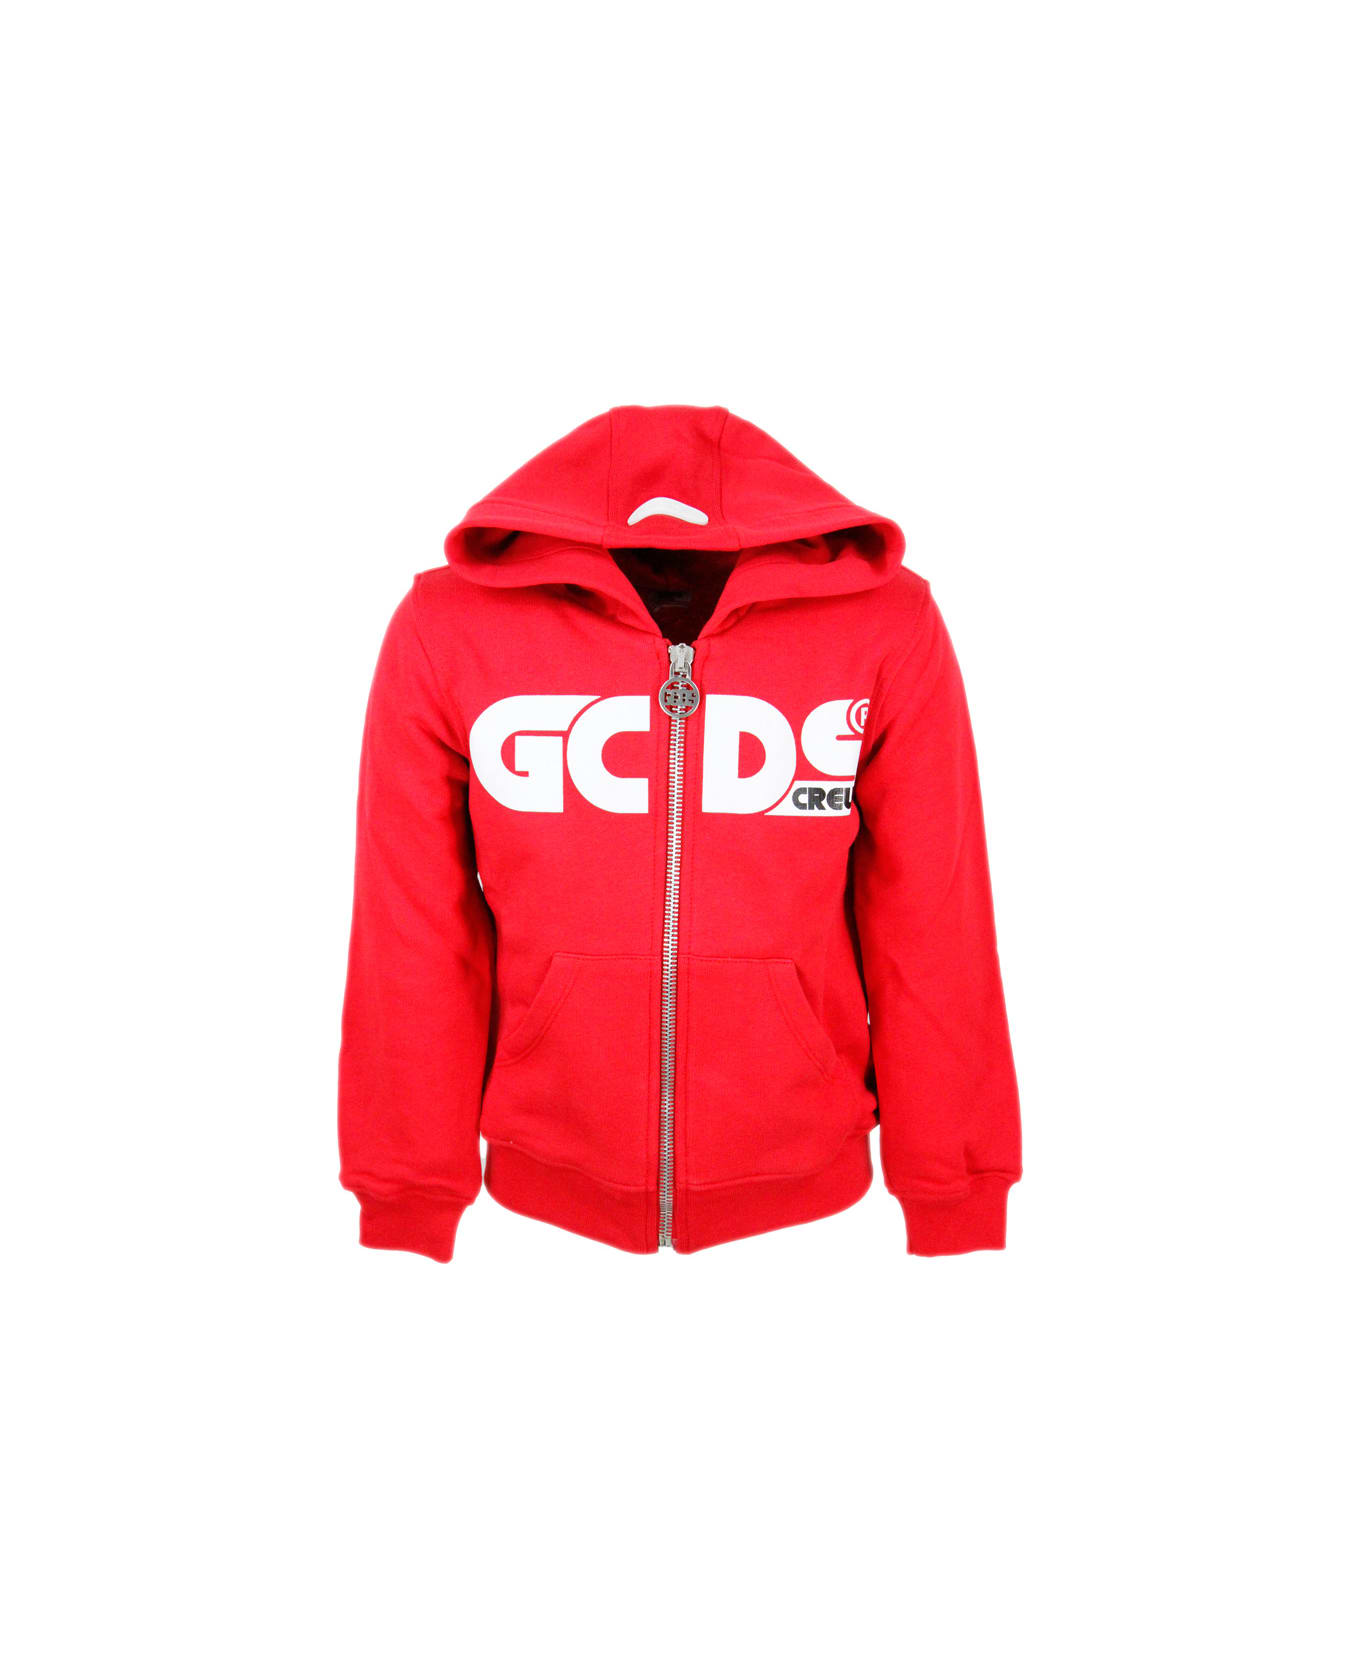 GCDS Hooded Sweatshirt With Zip And Fluo Writing - Red